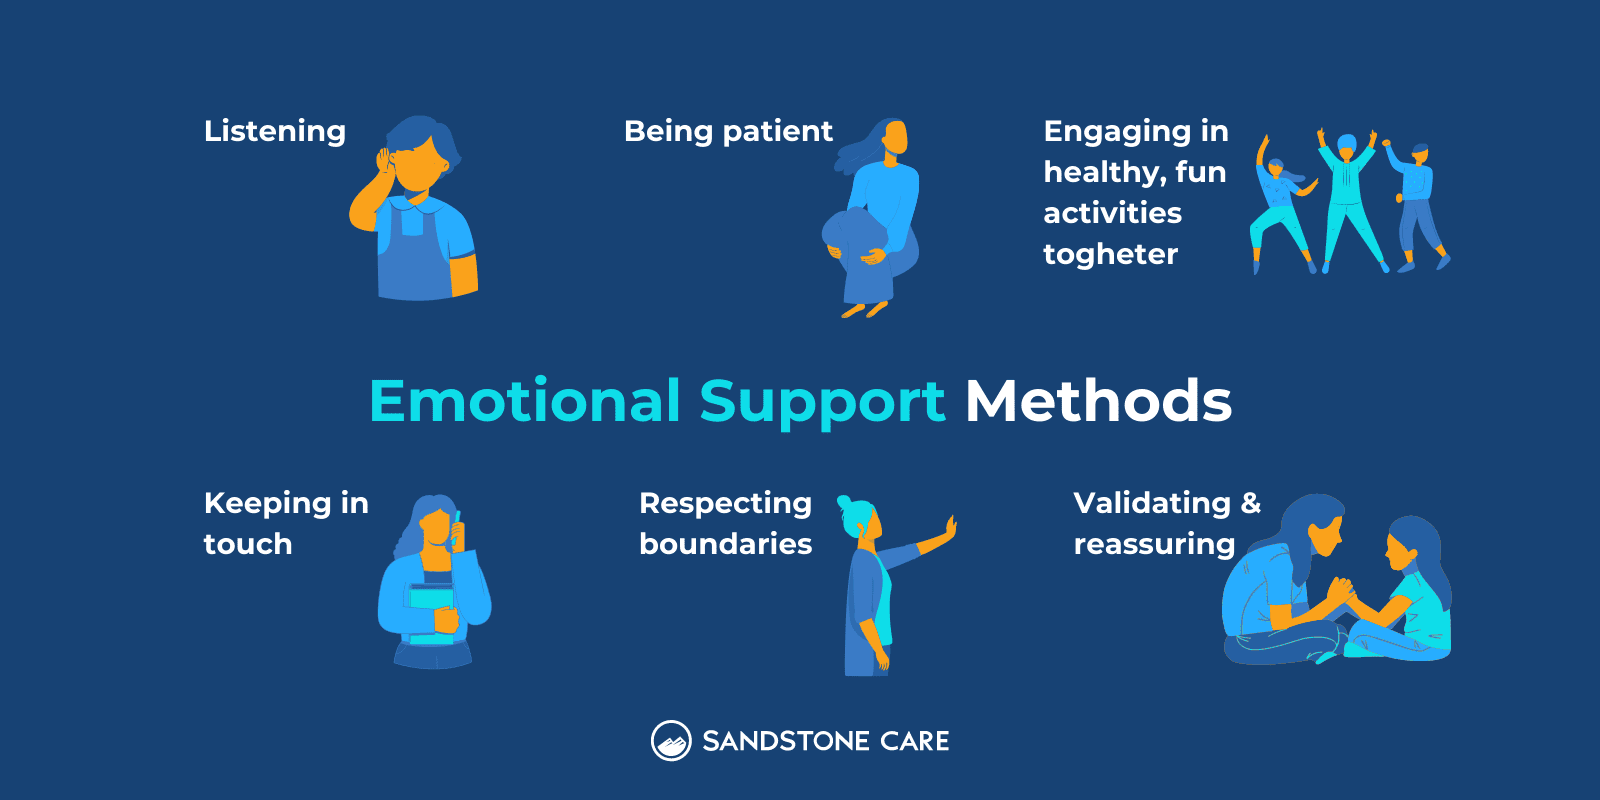 6 Emotional Support Methods represented with relevant graphics